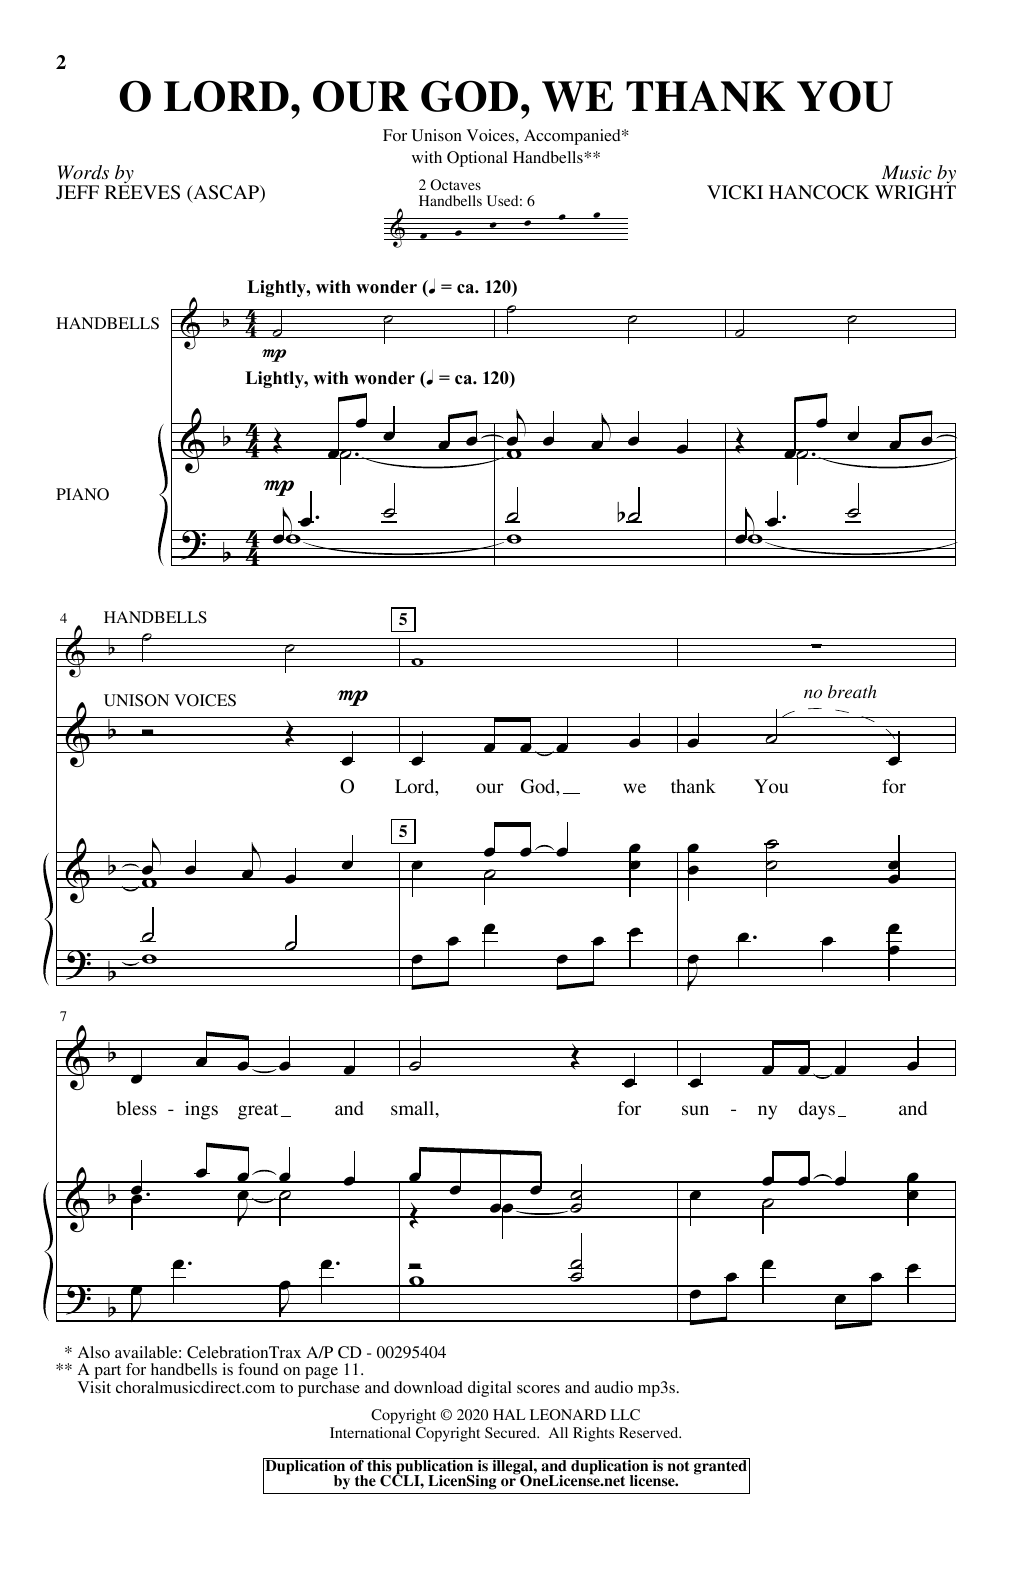 Download Jeff Reeves and Vicki Hancock Wright O Lord, Our God, We Thank You Sheet Music